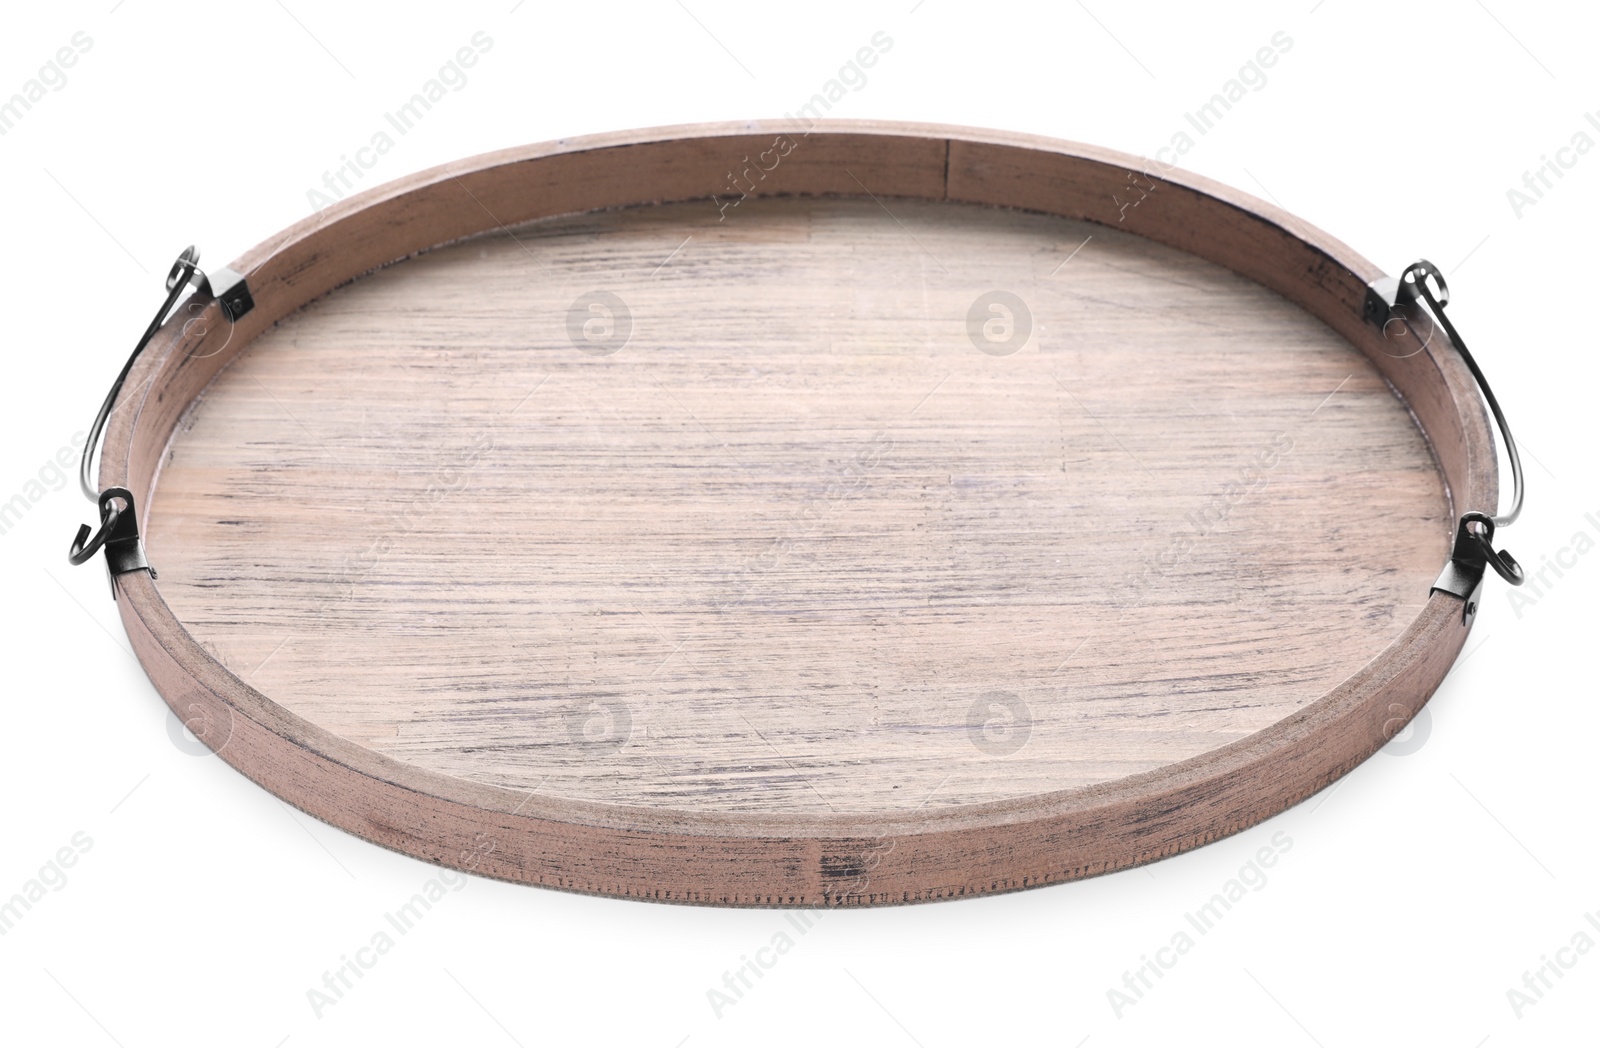 Photo of One empty wooden tray isolated on white